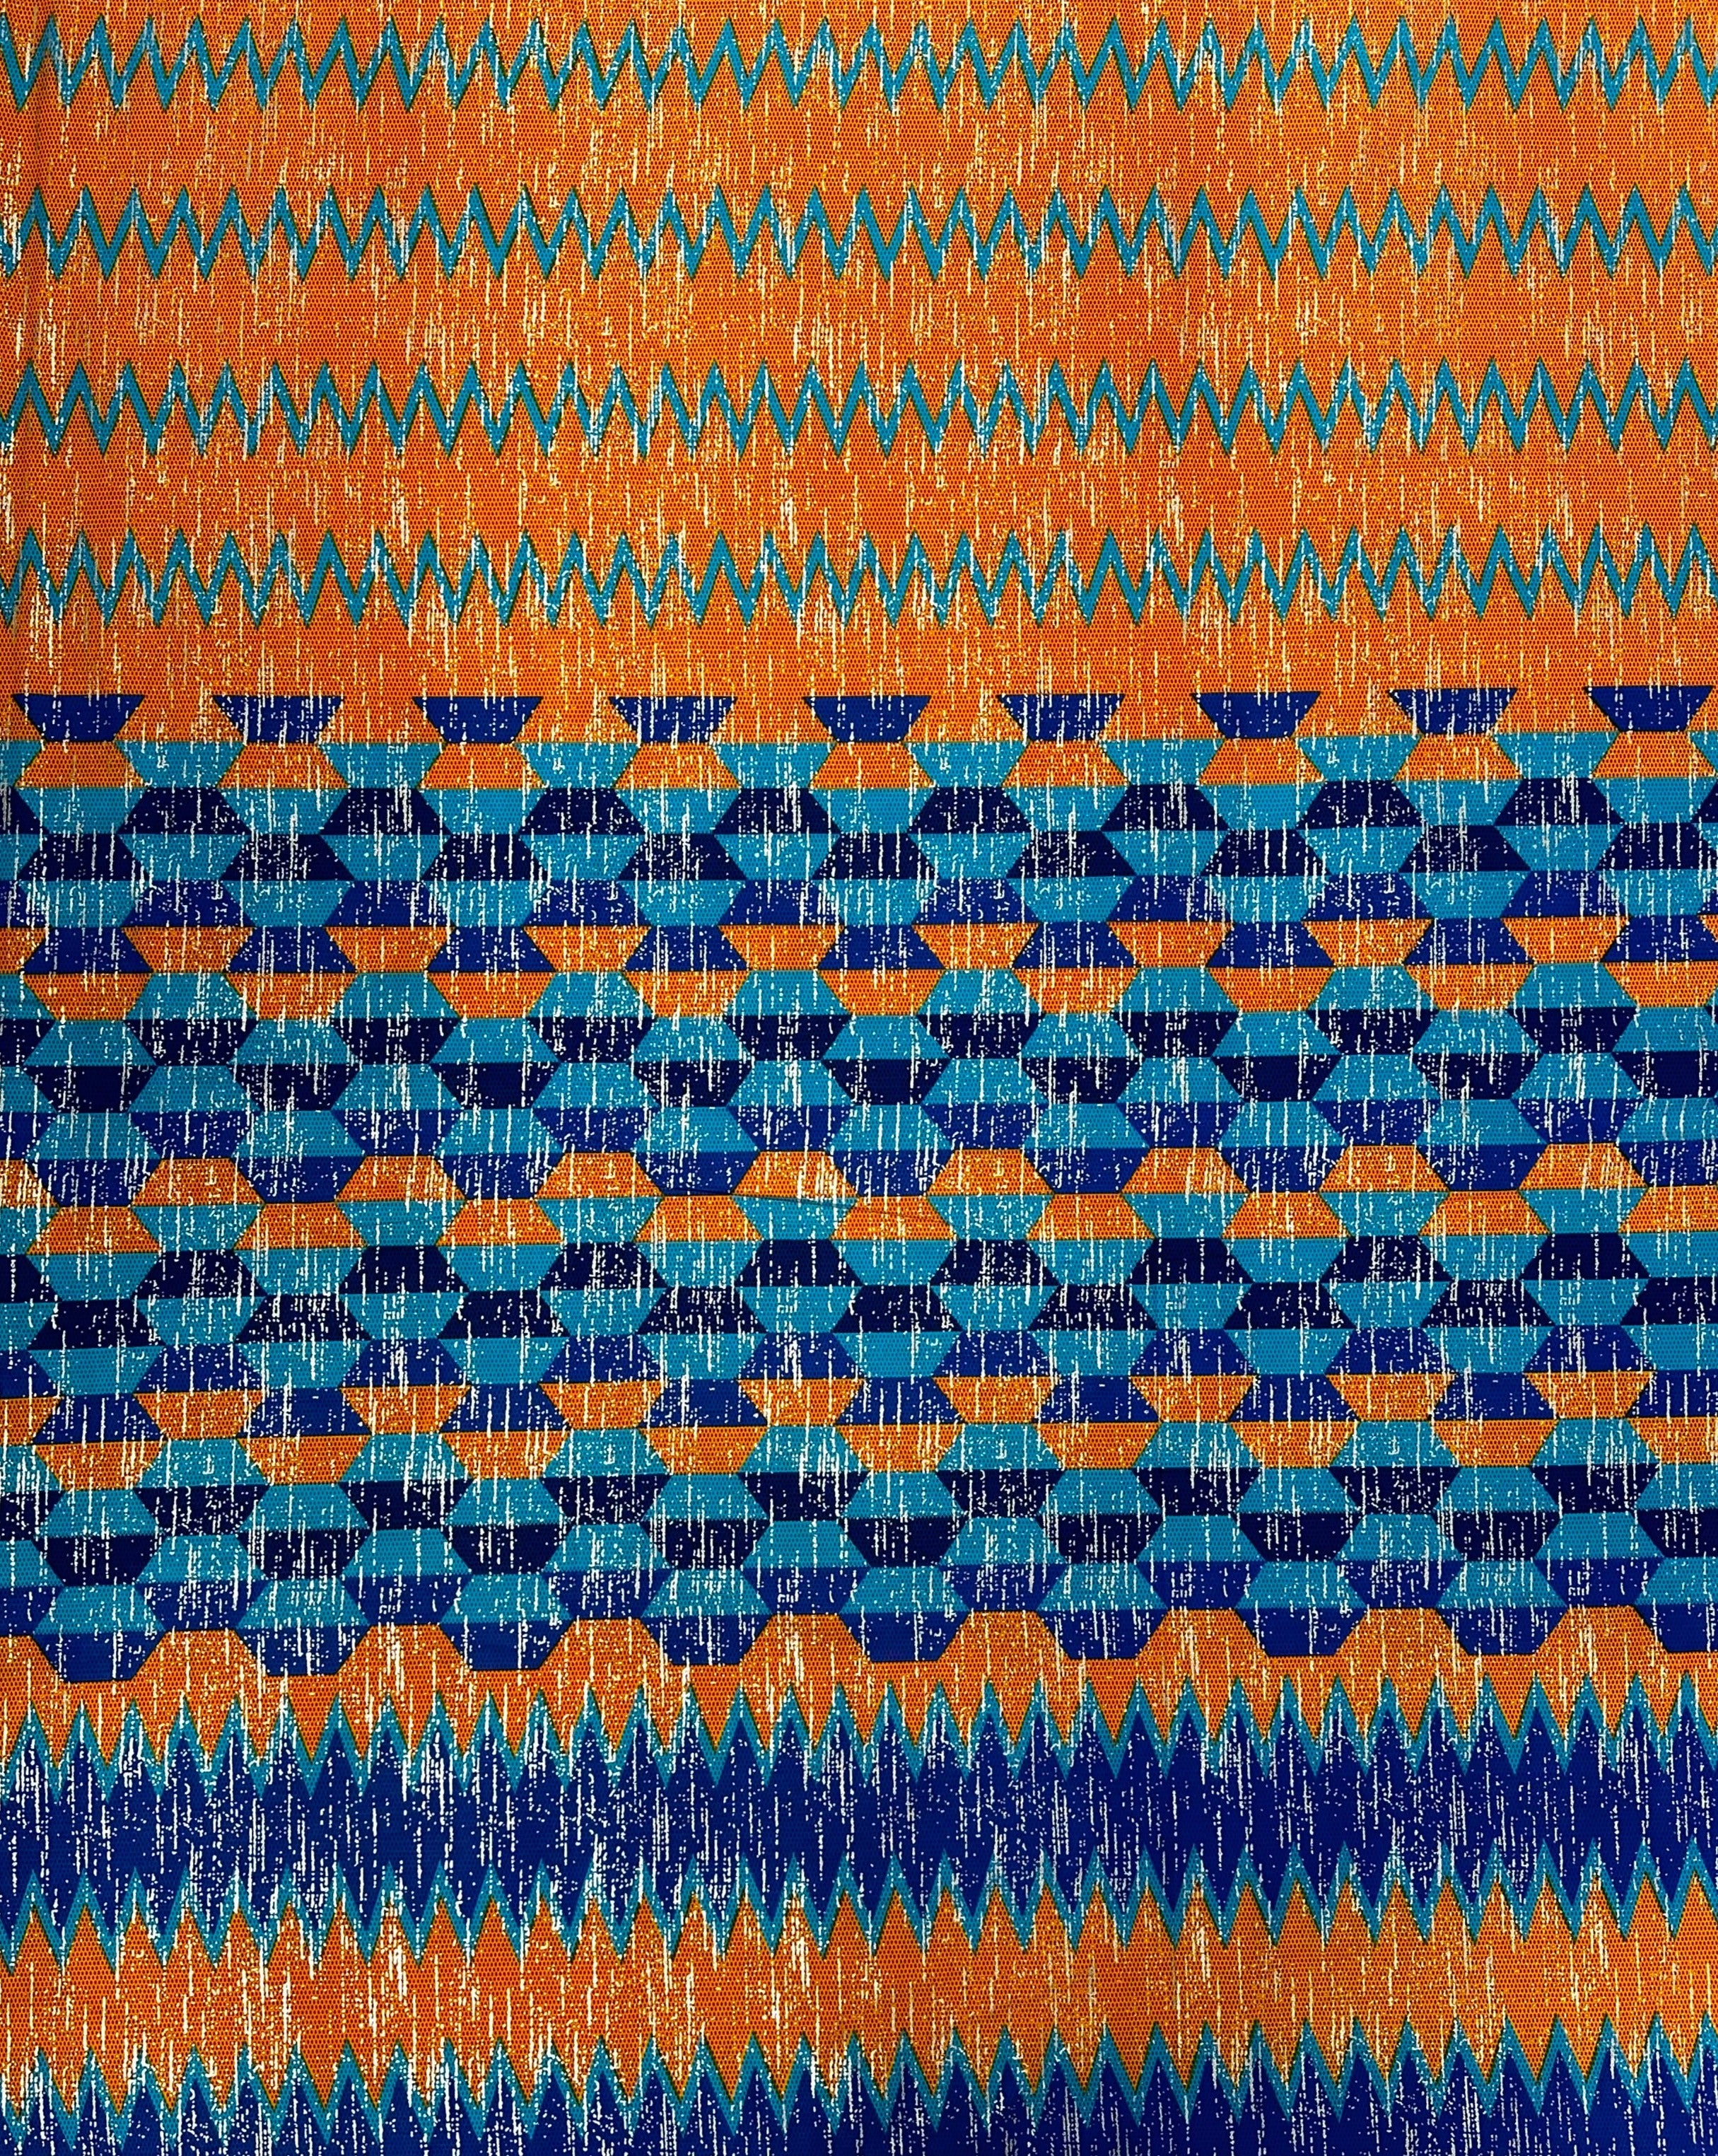 Tangerine Etchings: Vibrant African Print Fabric - 100% Cotton"